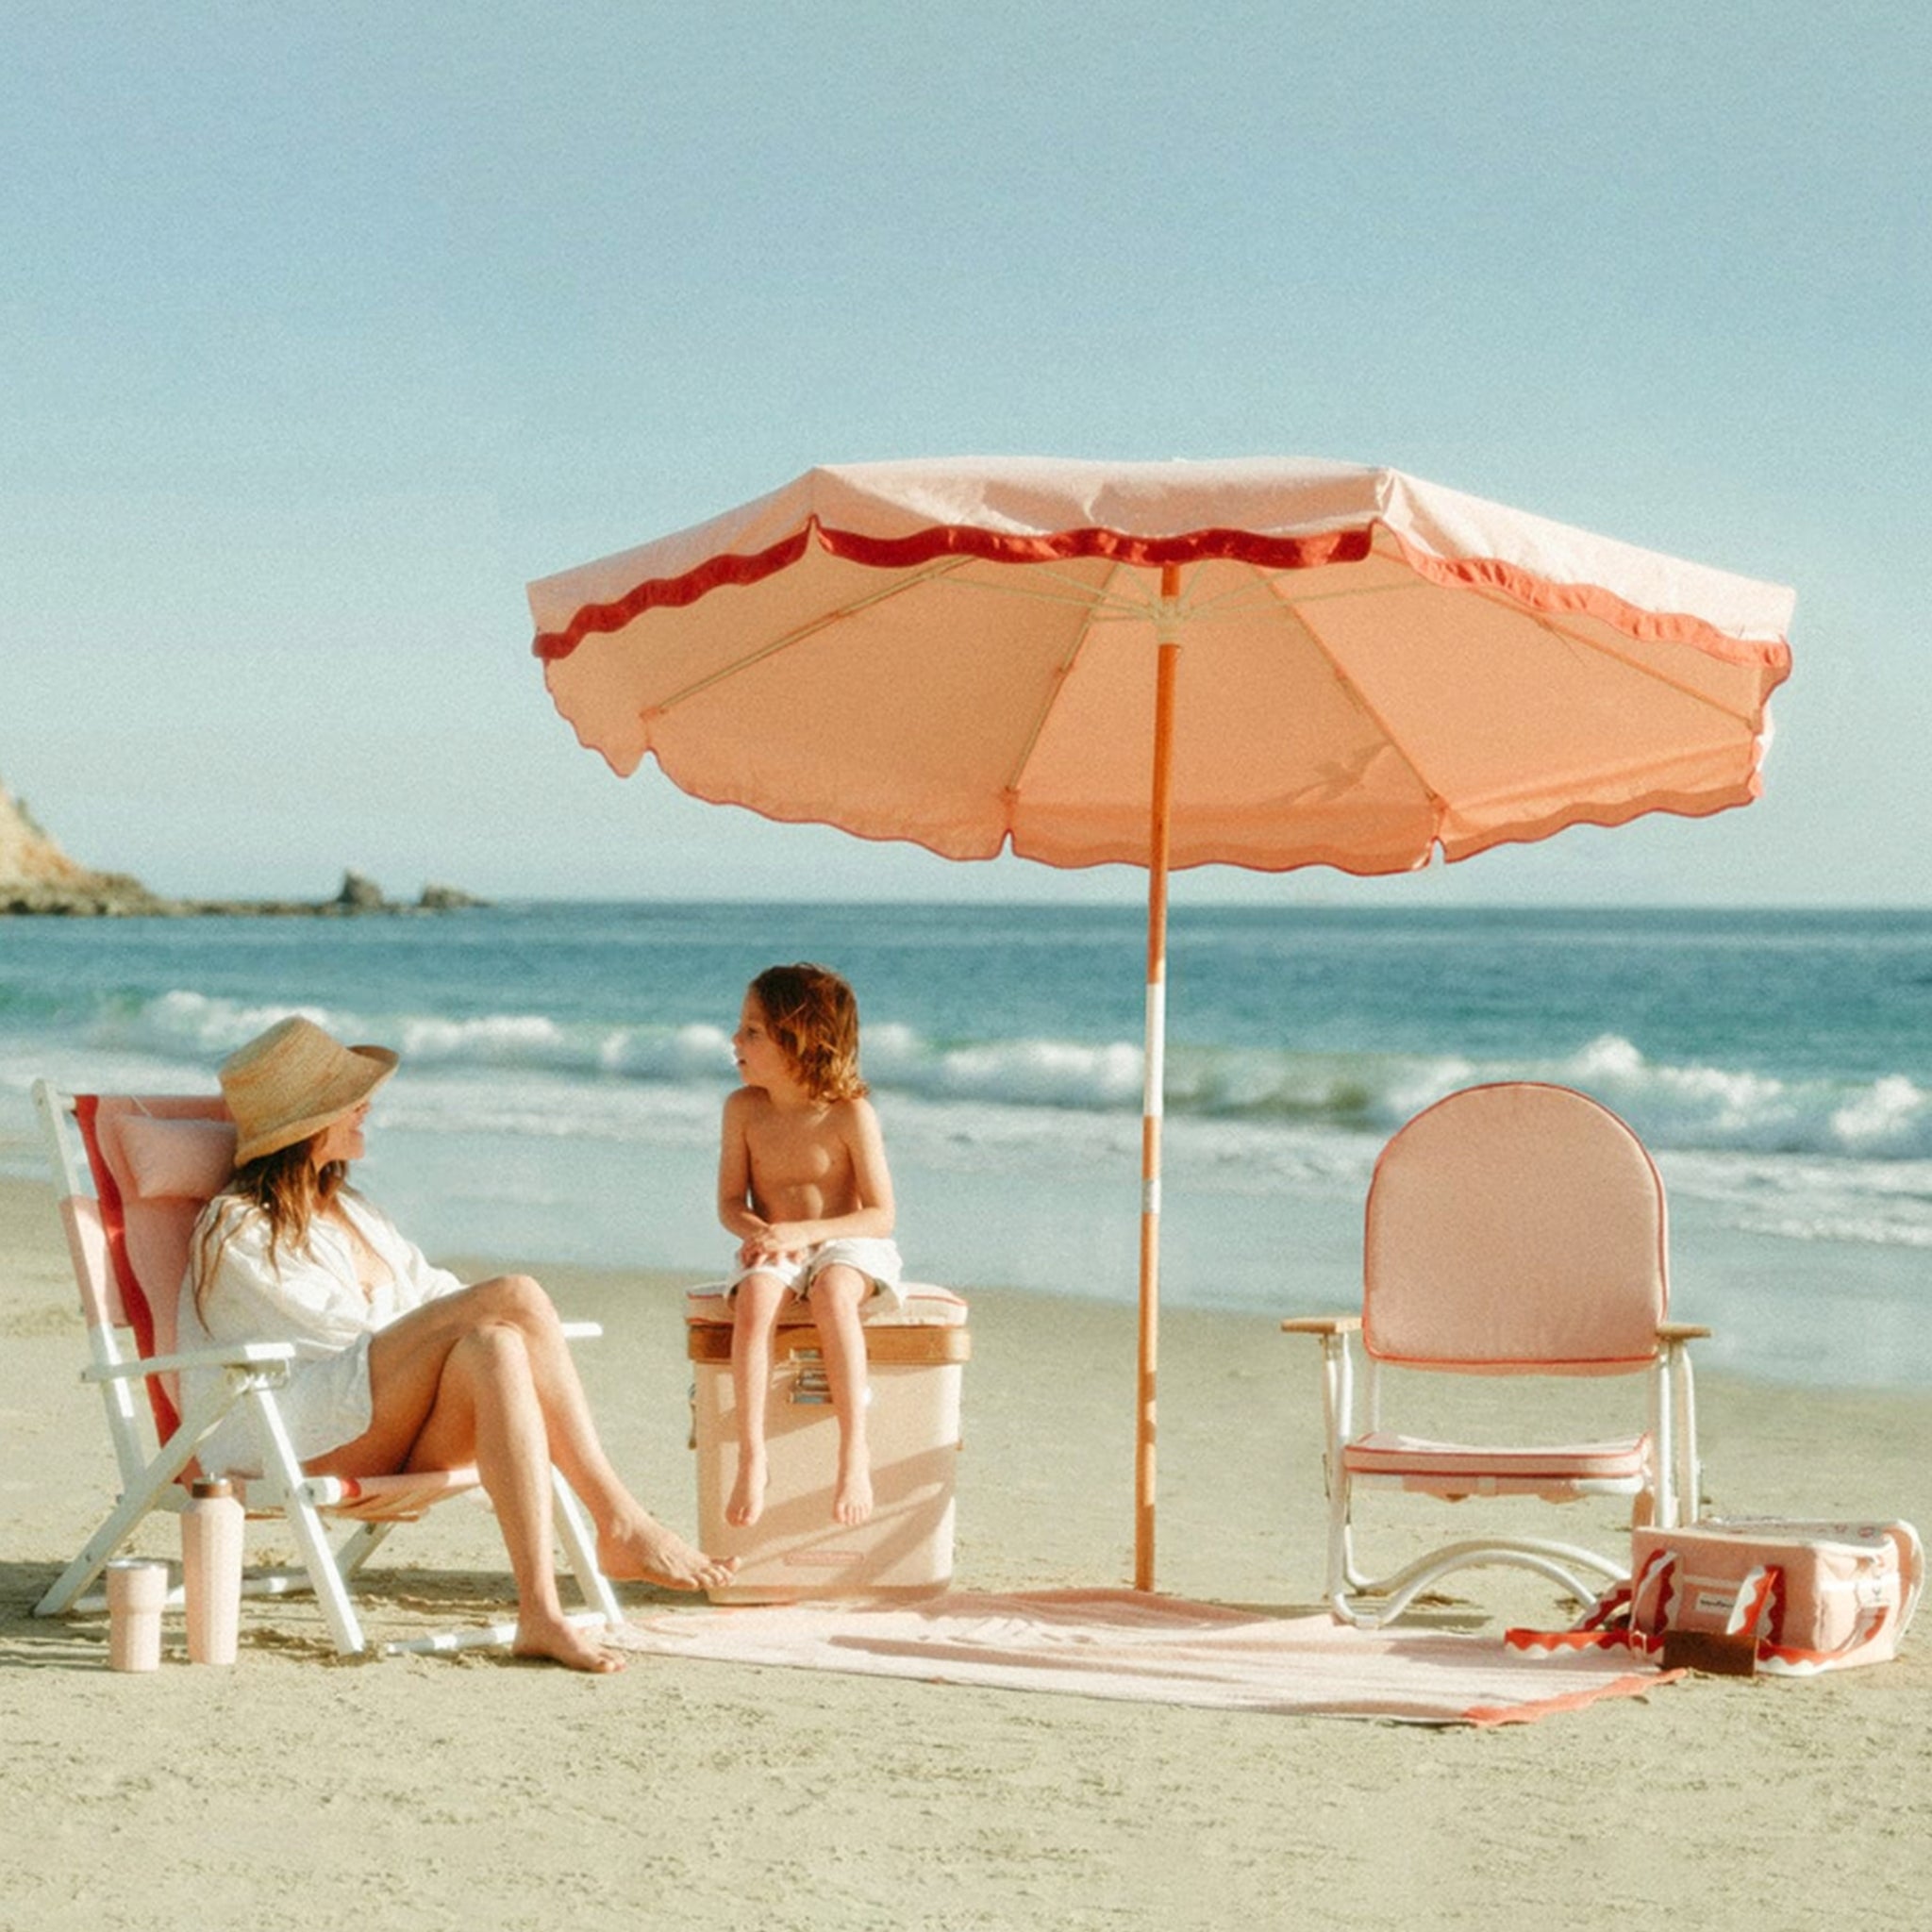 A pink arched folding beach chair with a reddish/dark pink lining around the edge and wood arm rests. 